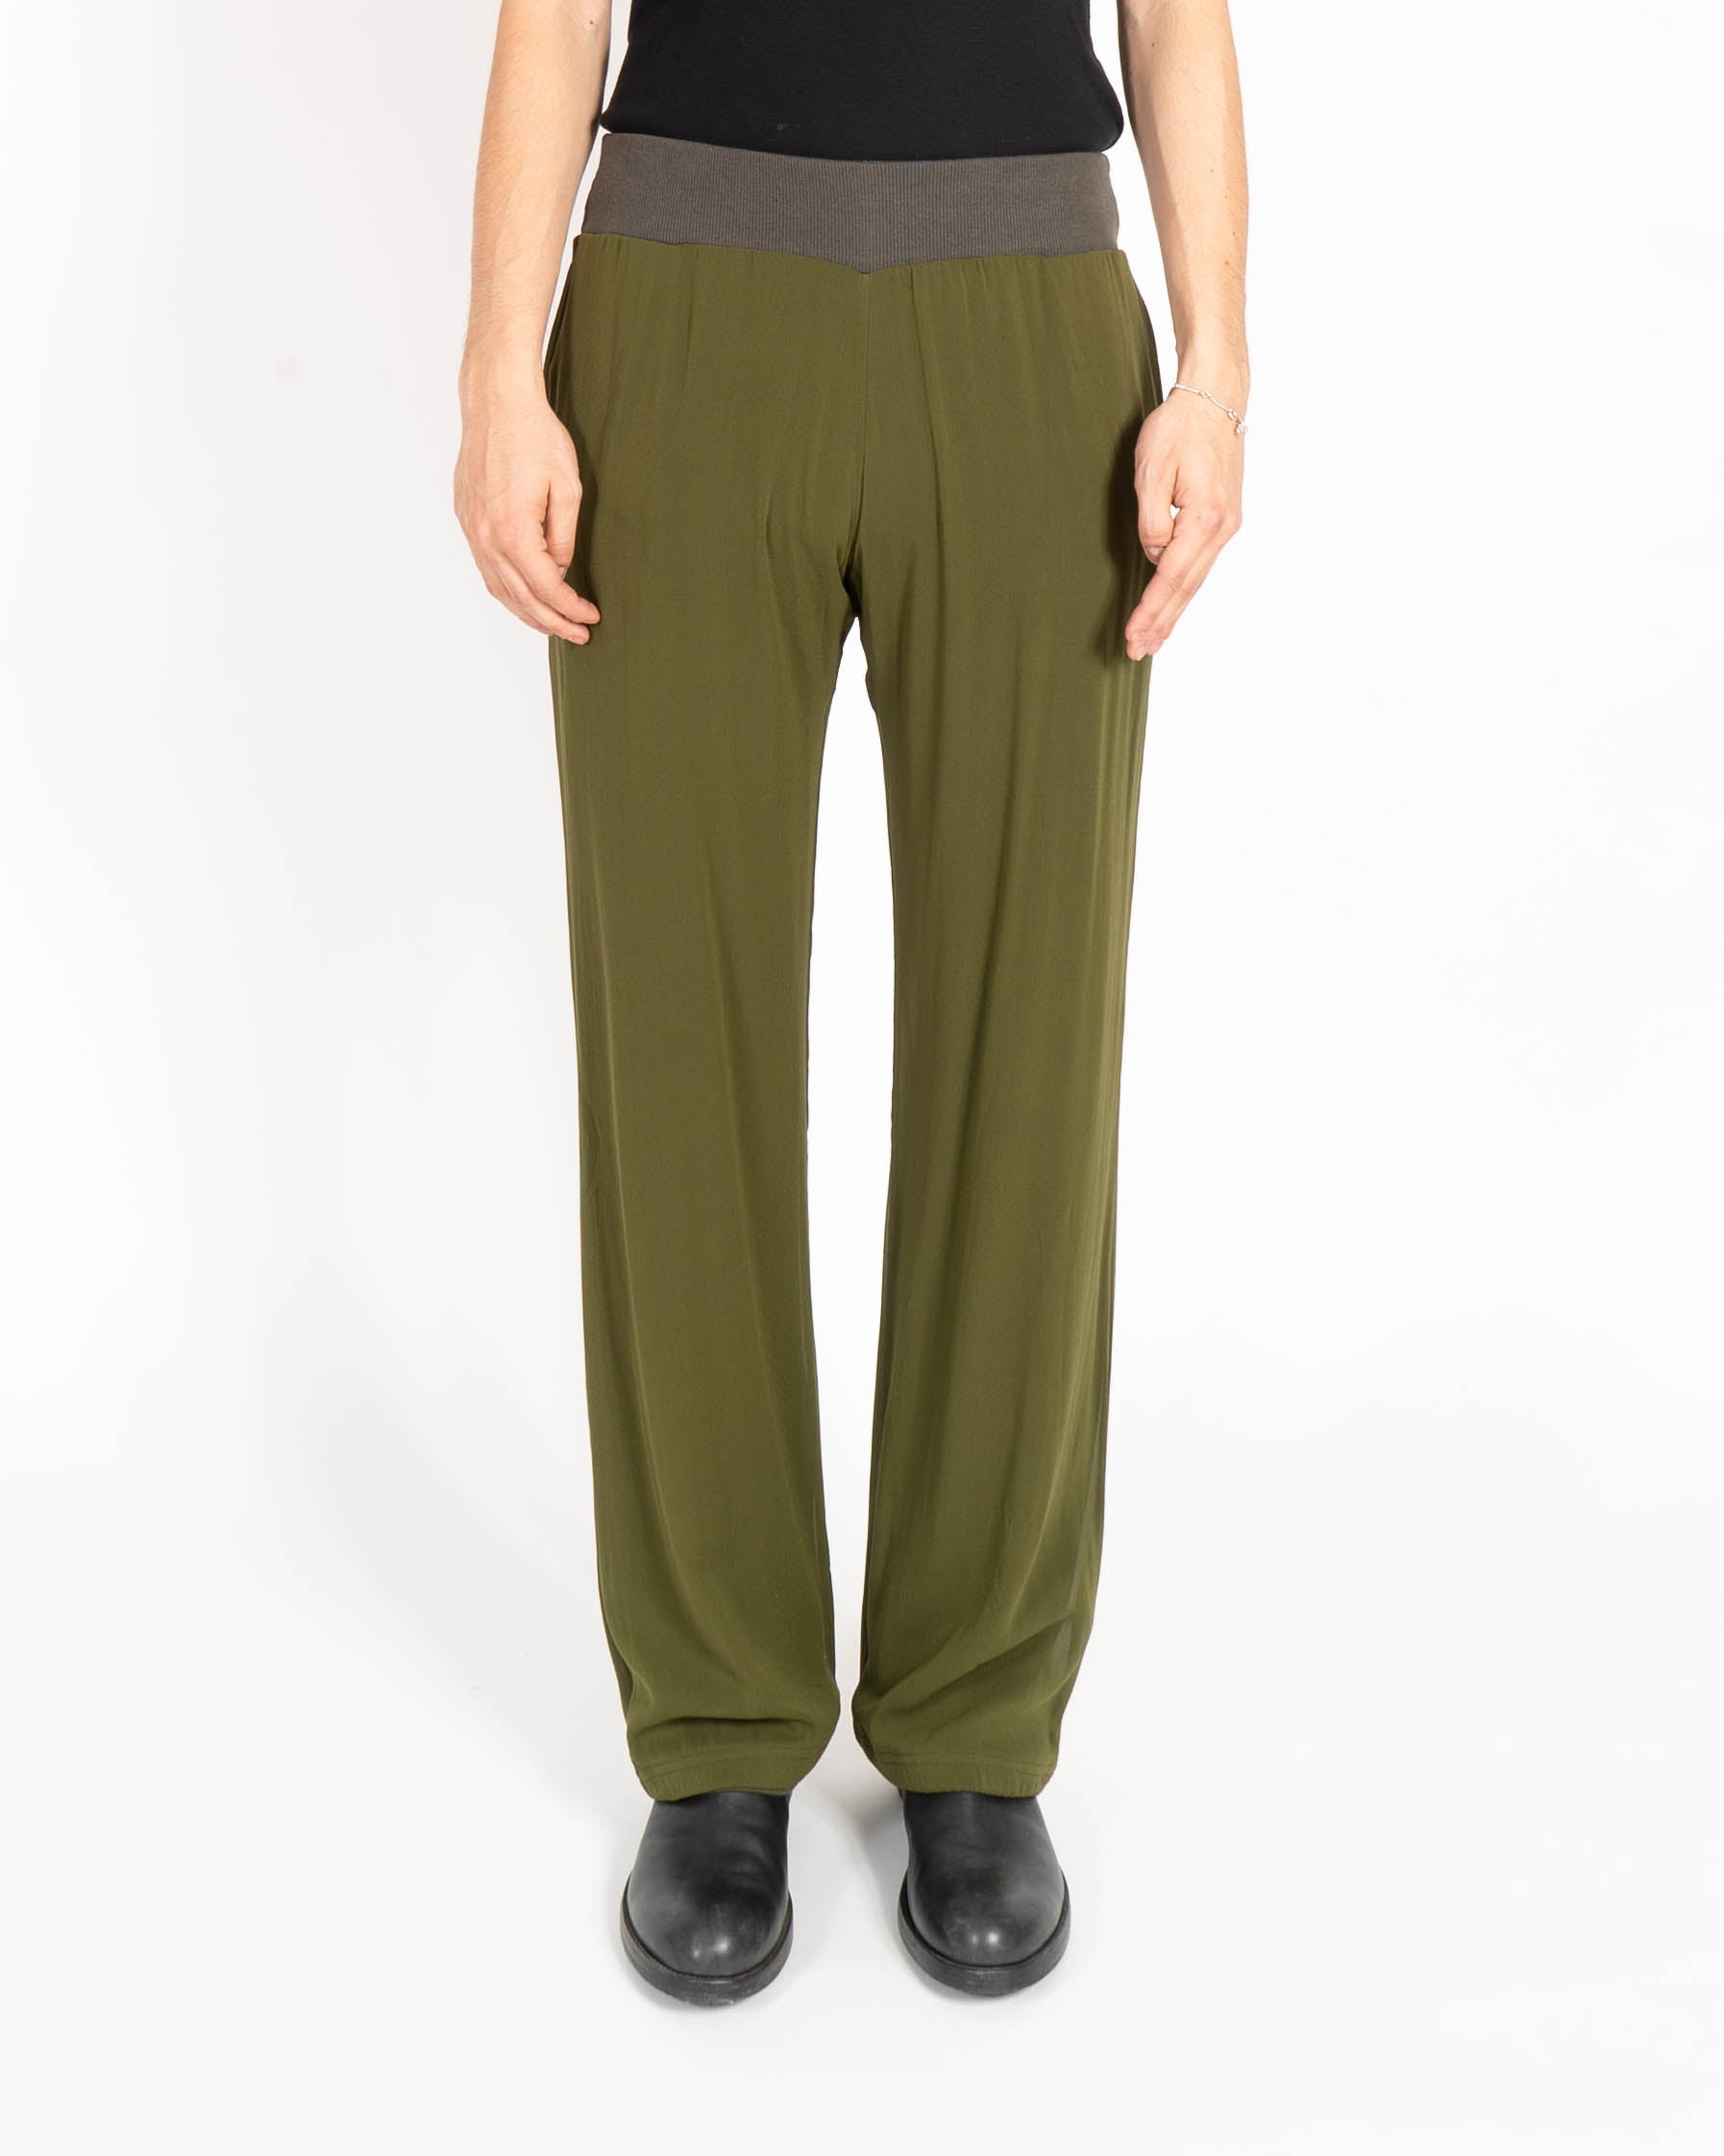 SS20 Knitted Waistband Trousers in Green Silk